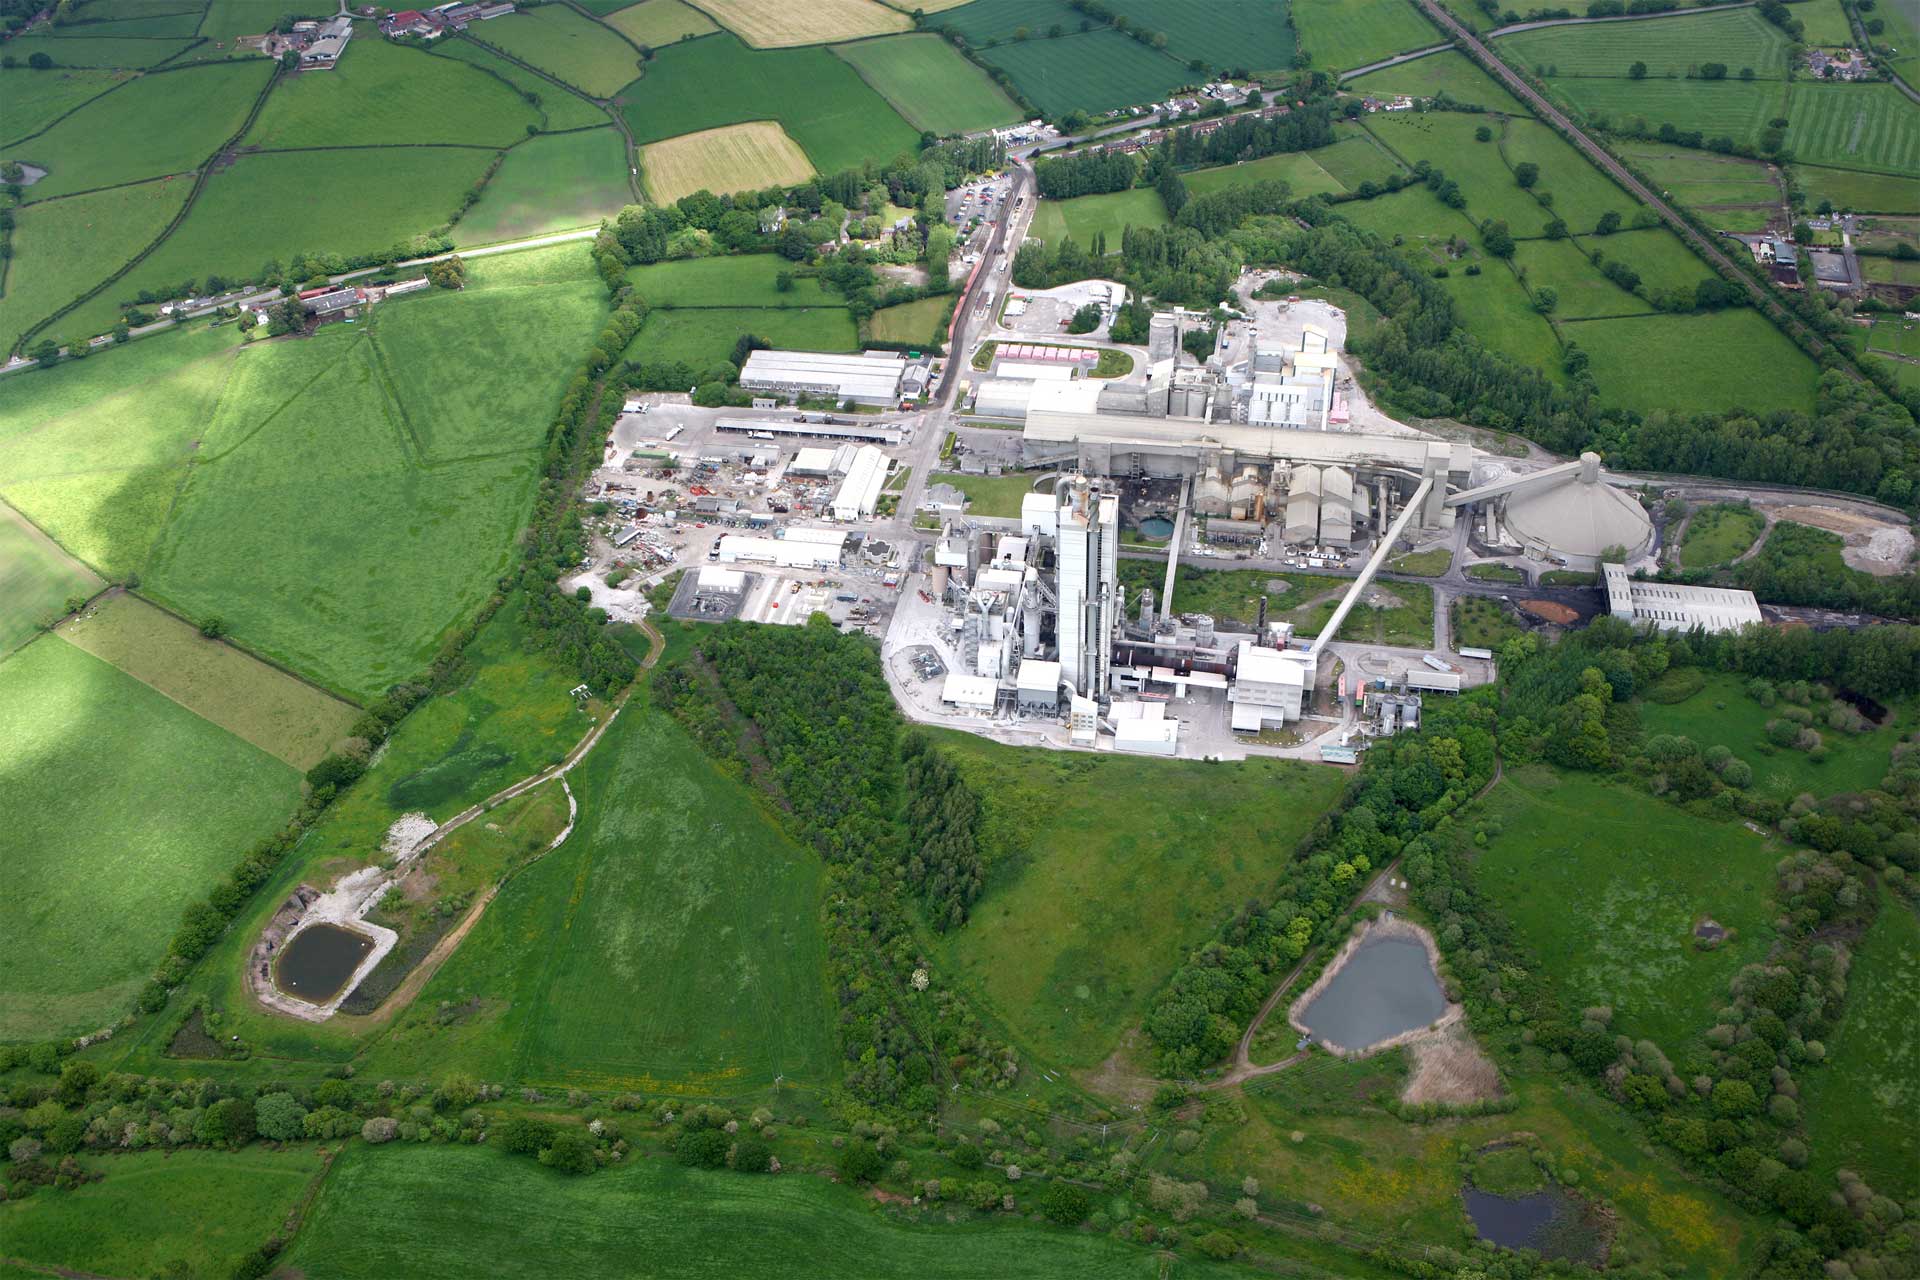 Aerial view of an industrial complex amid green fields, highlighting the contrast between industry and nature